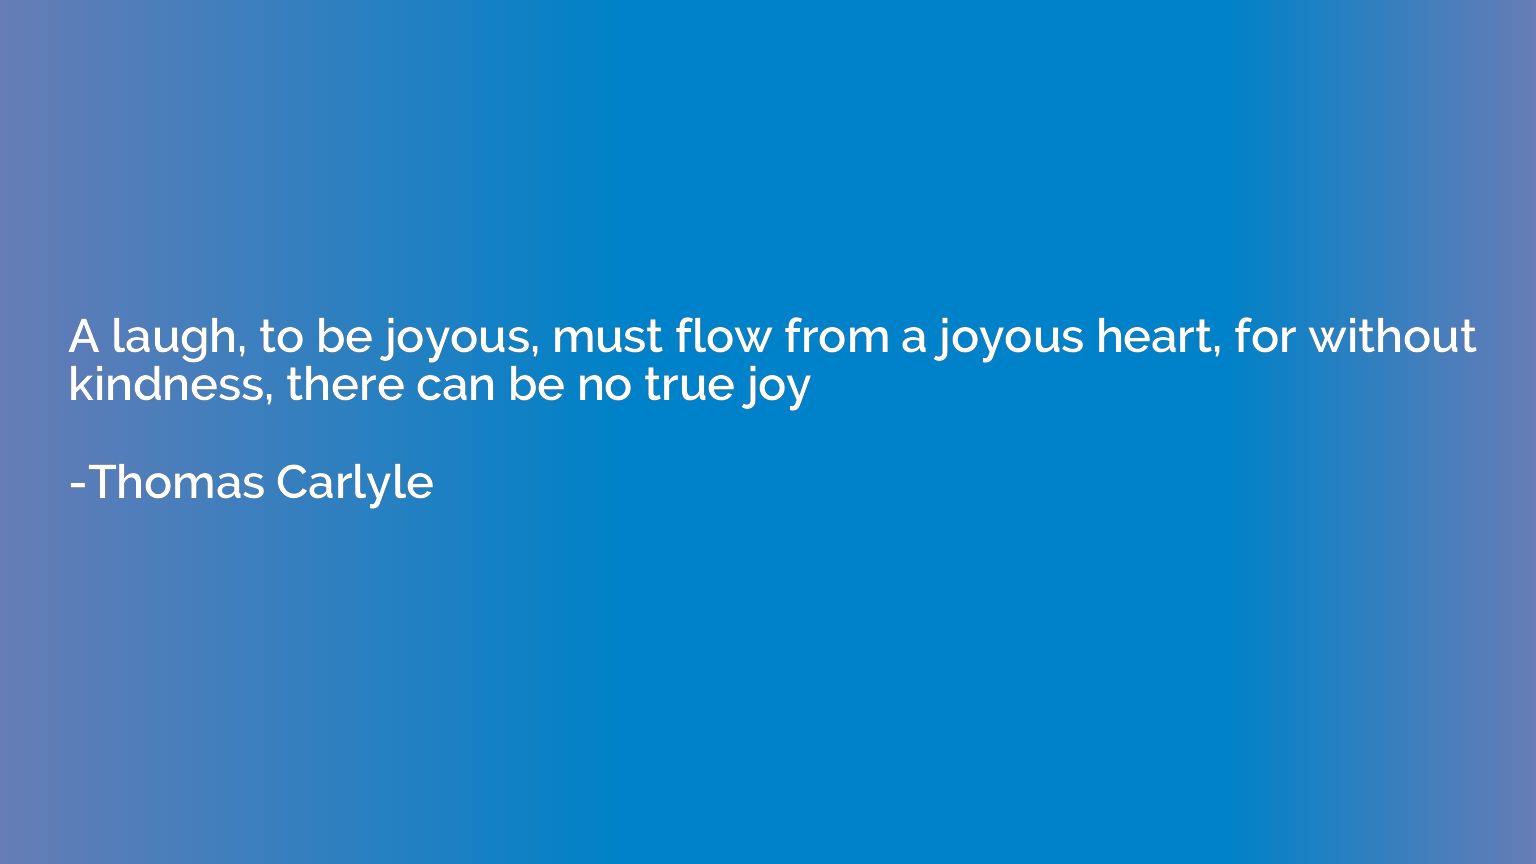 A laugh, to be joyous, must flow from a joyous heart, for wi